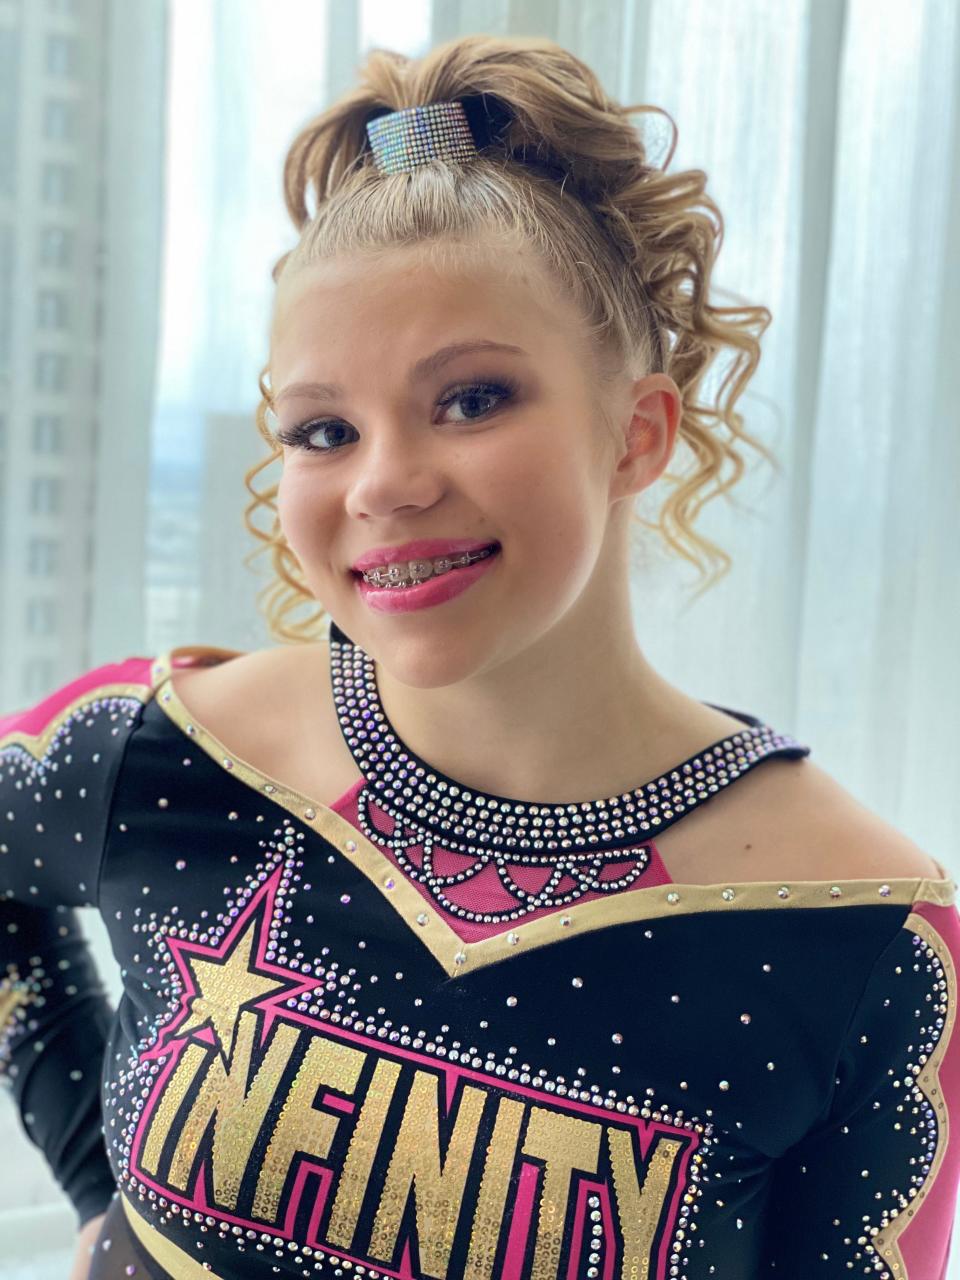 Tristyn Bailey, a 13-year-old cheerleader in St. Johns County, was killed on May 9, 2021.